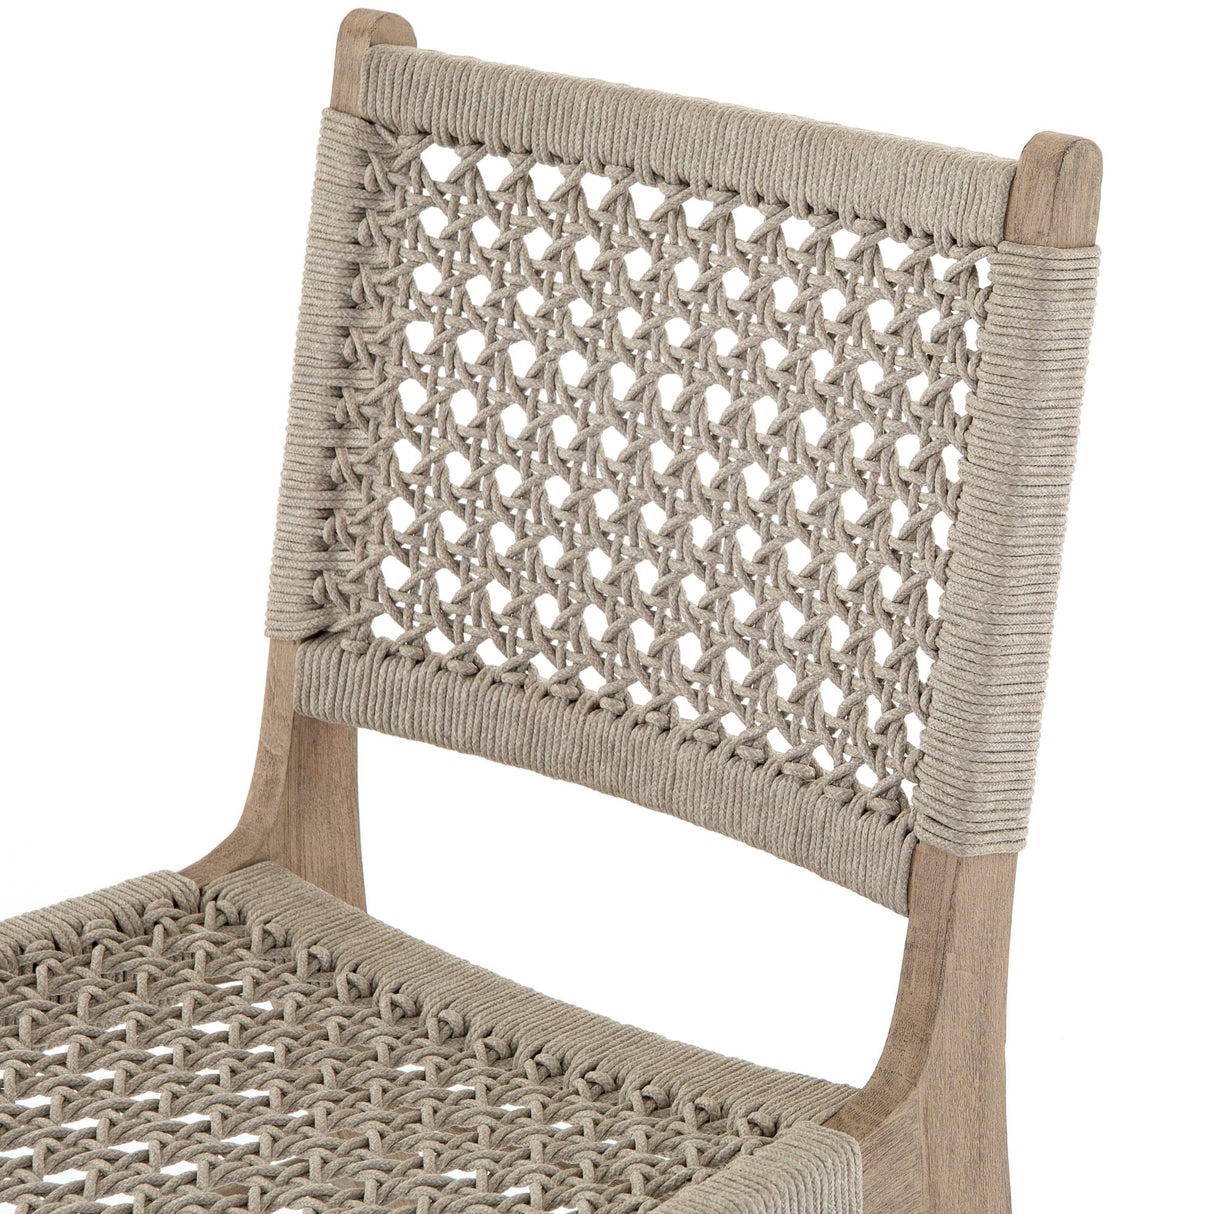 Four Hands Delmar Outdoor Dining Chair Furniture